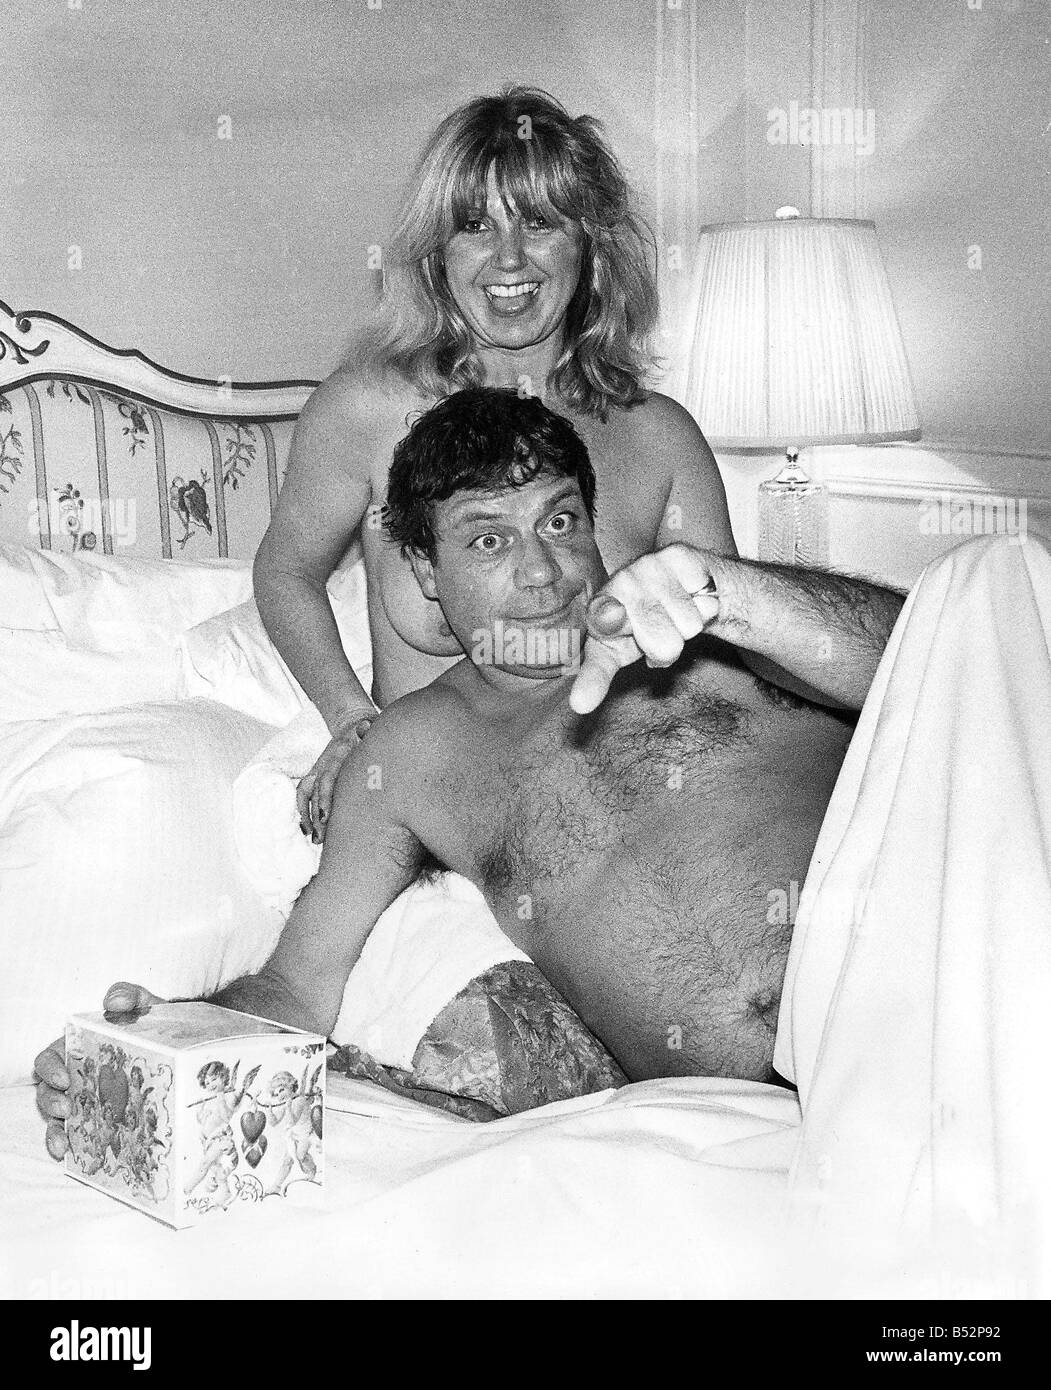 Elizabeth Ewall with Oliver Reed in Bed Stock Photo